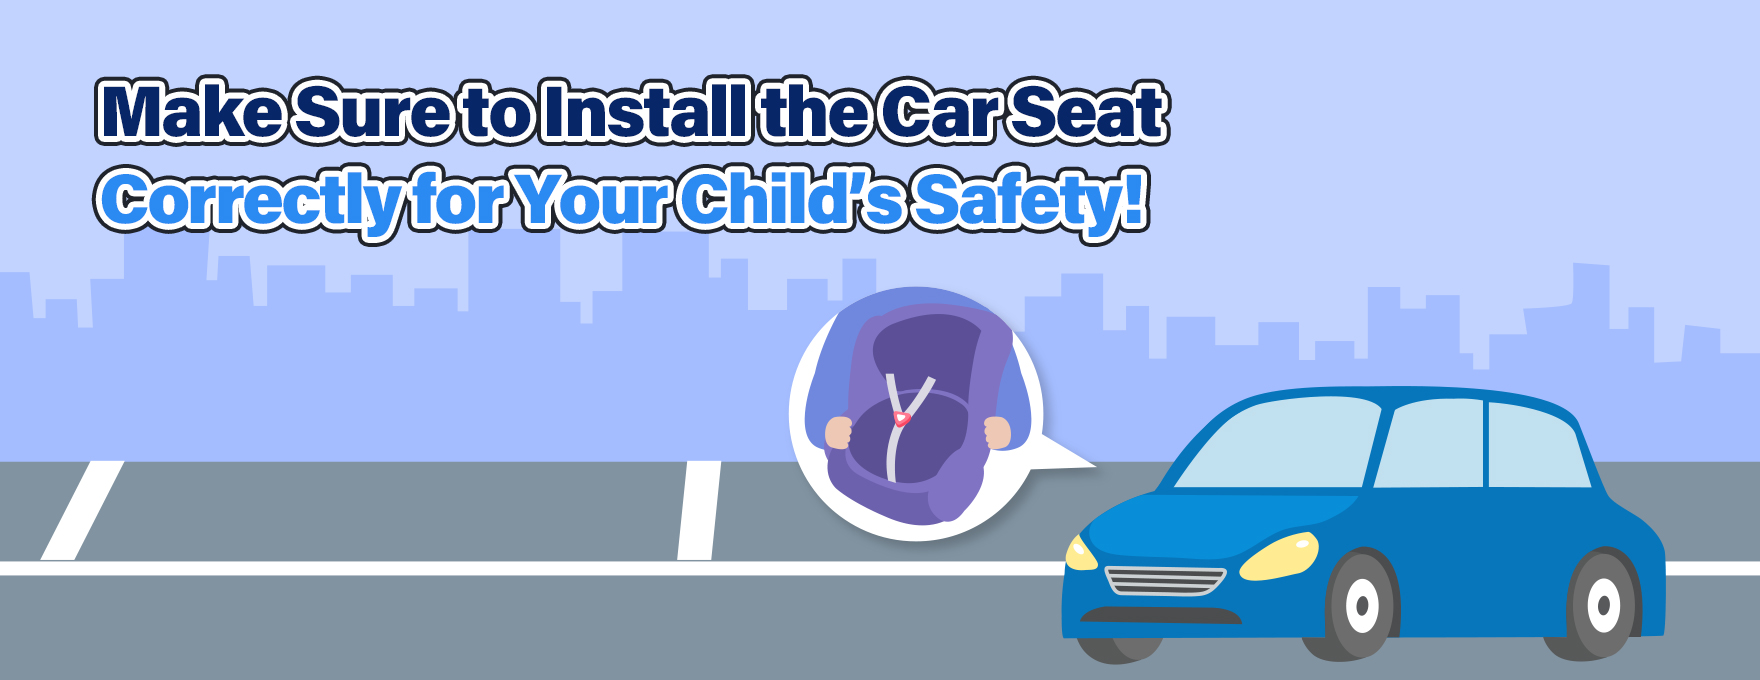 Make sure to install the car seat correctly for your child's safety